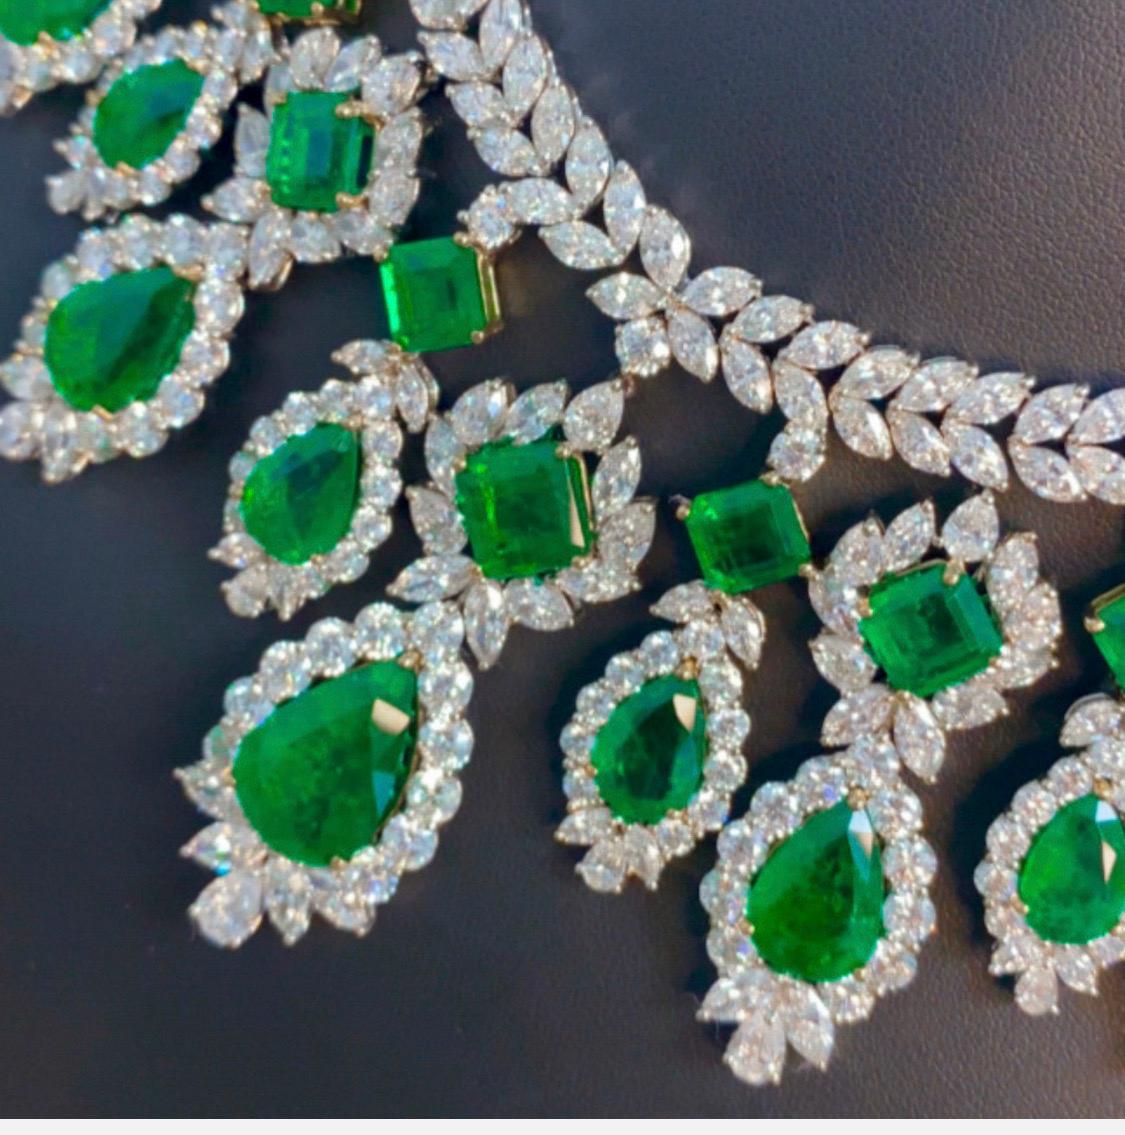 From The Museum Vault at Emilio Jewelry Located on New York's iconic Fifth Avenue,
Showcasing a very special and rare certified natural vivid green emerald necklace and earring set. You can purchase just once piece we will adjust the price